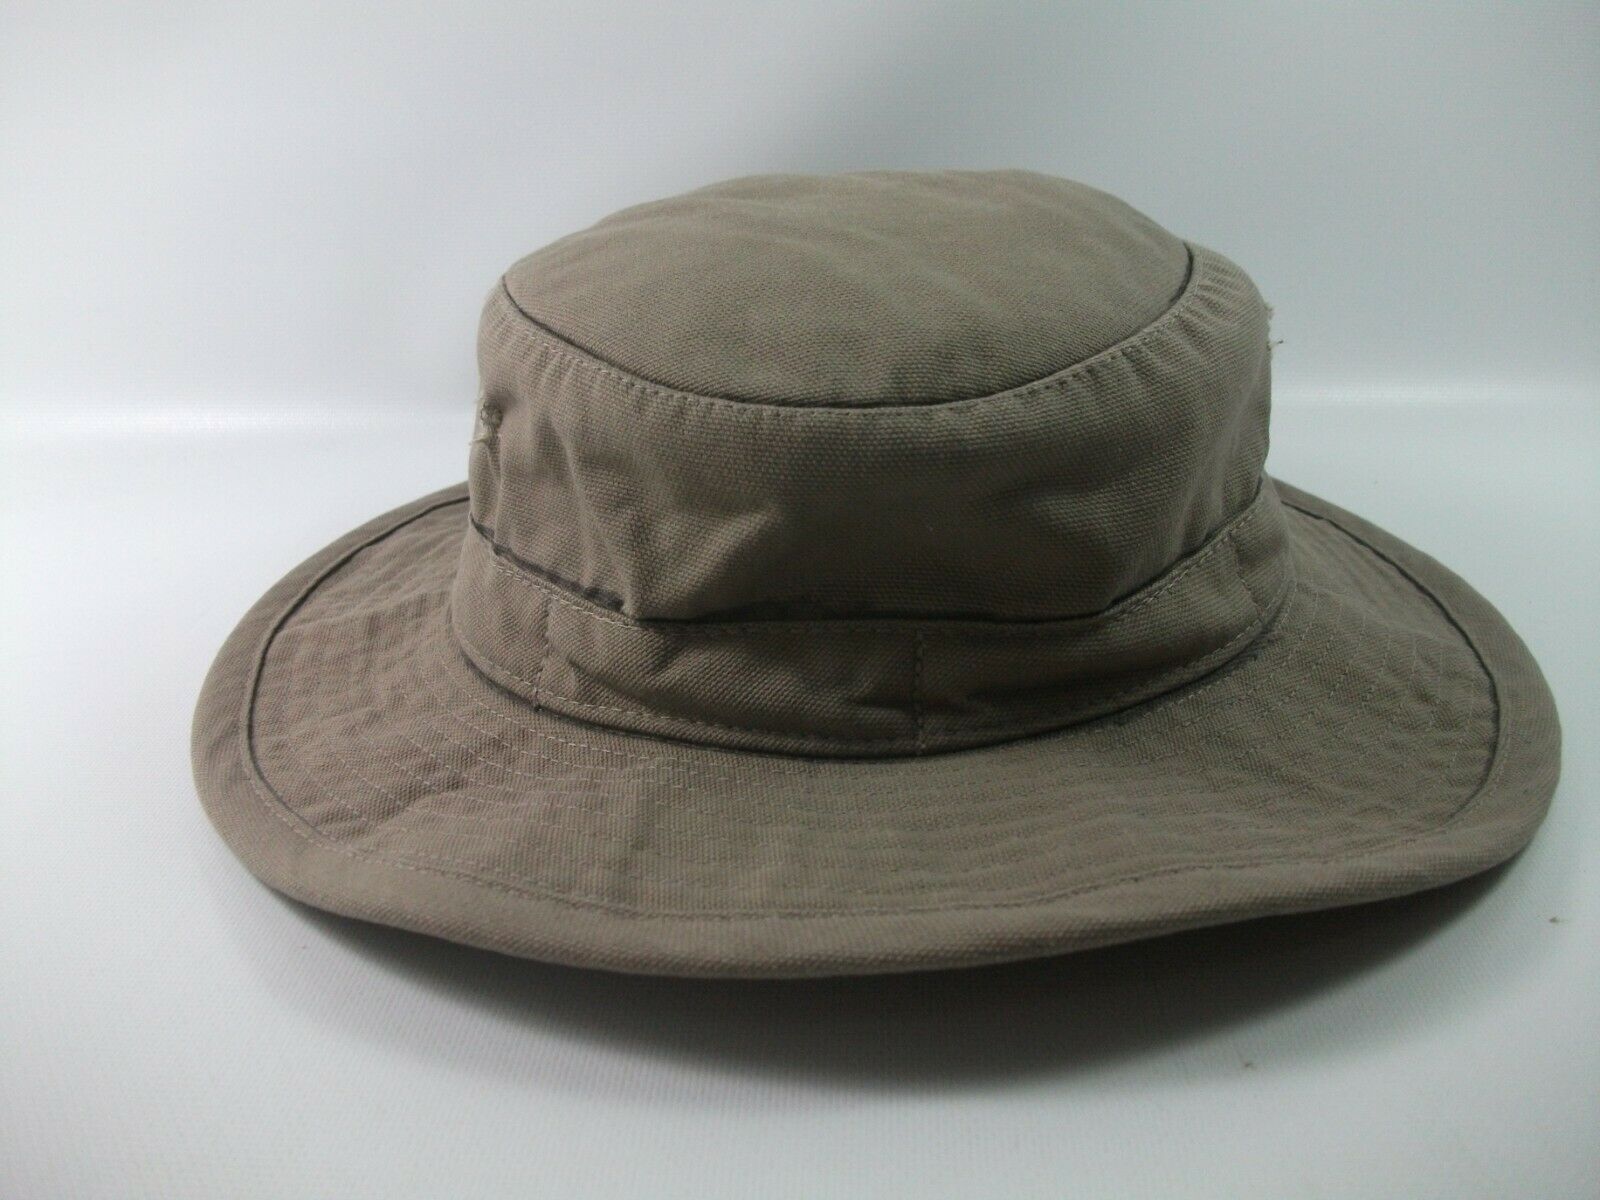 Logistik Unicorp Hat Large Beige Outback Cap Grommets Removed - Hats